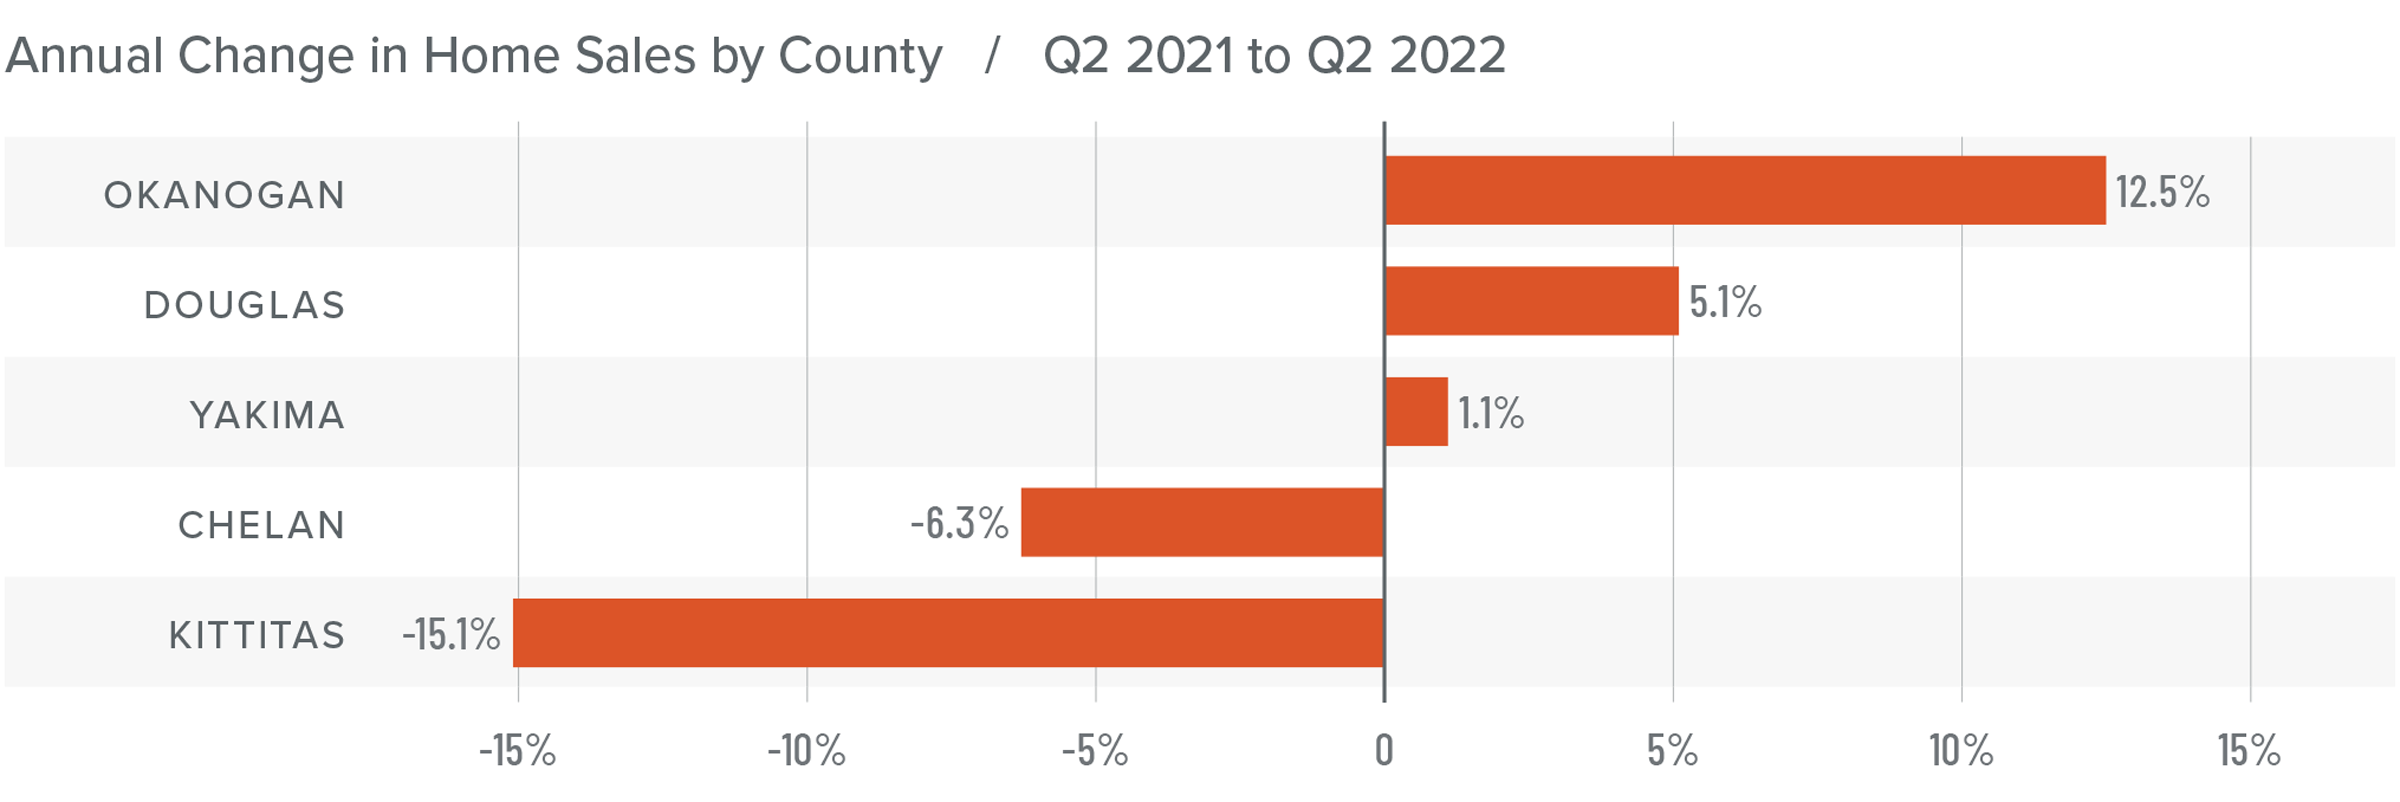 A bar graph showing the annual change in home sales for various counties in Central Washington from Q2 2021 to Q2 2022. Okanogan County came out on top with a 12.5% change, followed by Douglas at 5.1%, Yakima at 1.1%, Chelan at -6.3%, and Kittitas at -15.1%.